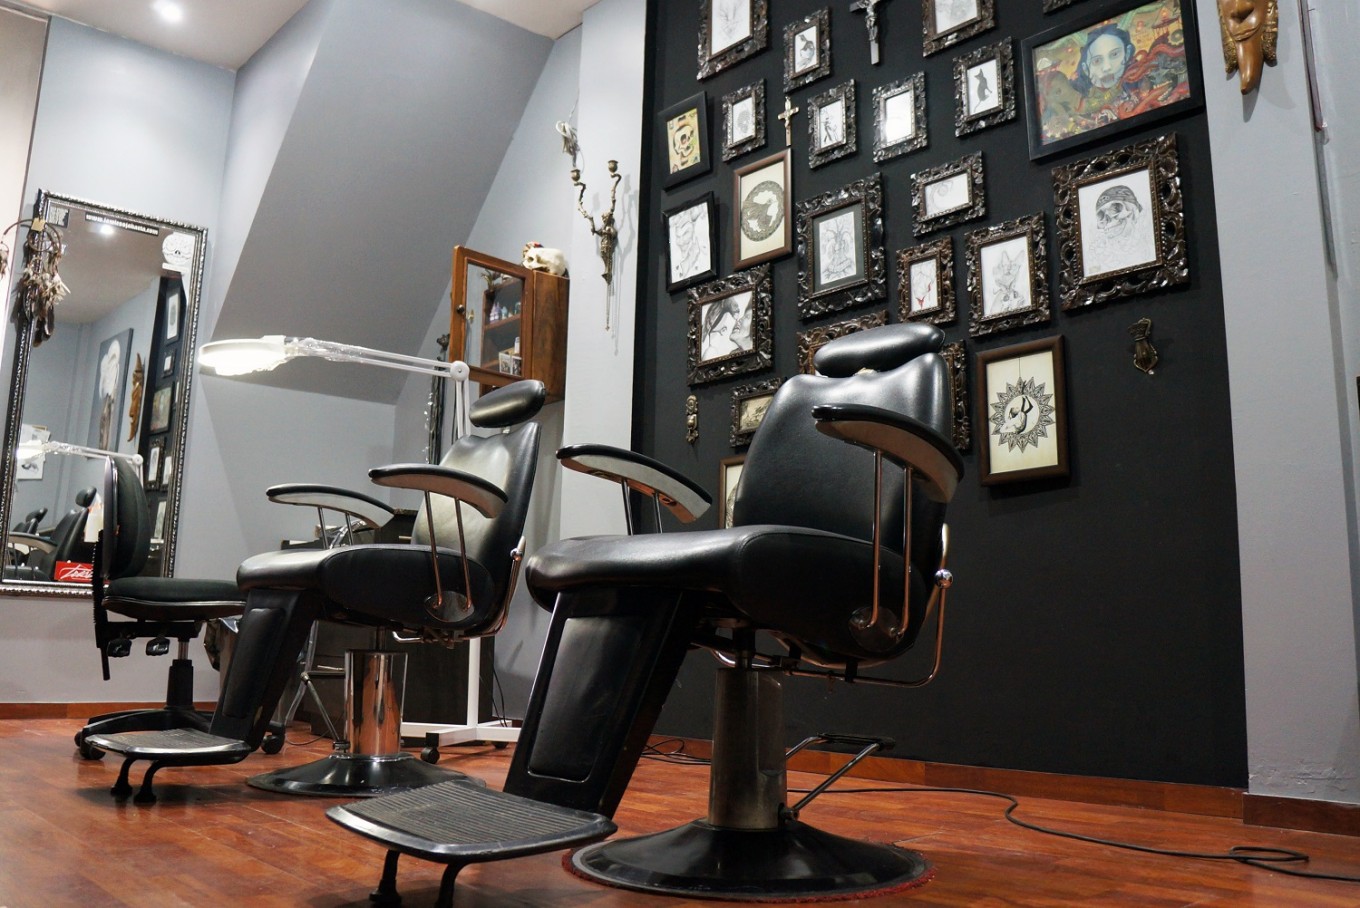 New Royal Beauty Parlour & Tattoo Studio in Amgaon Gondia,Gondia - Best  Beauty Parlours in Gondia - Justdial